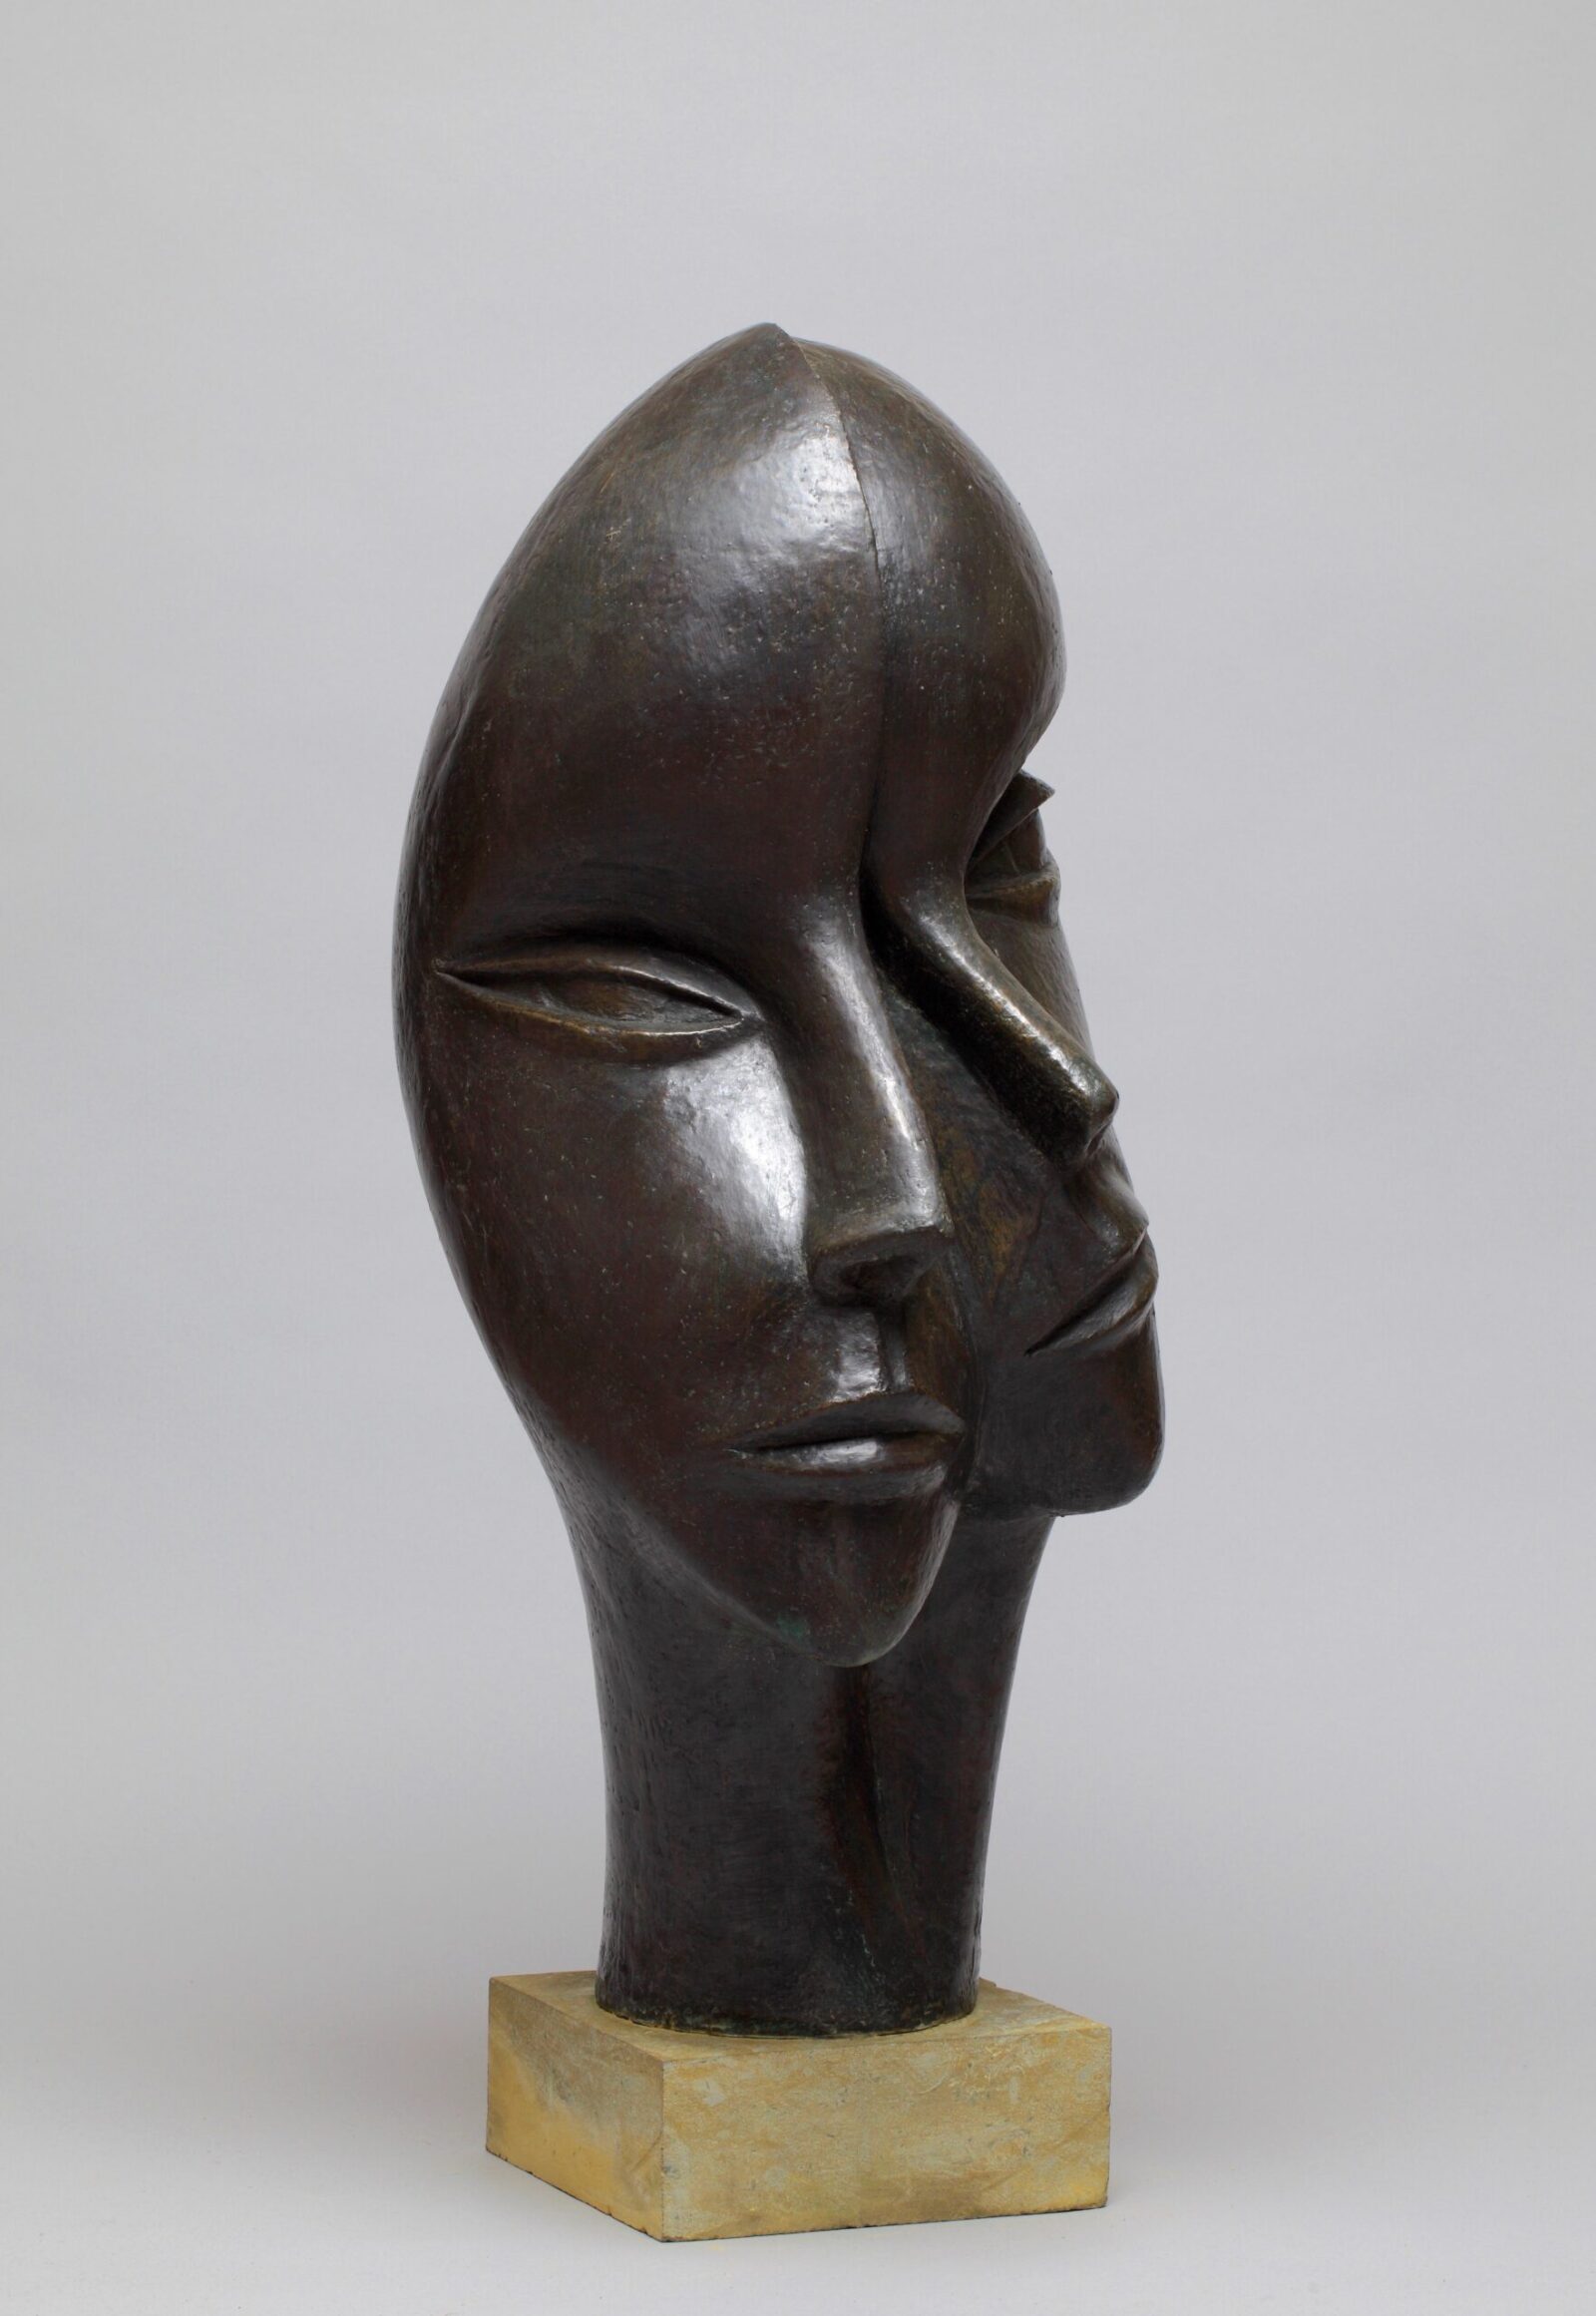 contemporary garden bronze sculpture of a n double head based on Picasso